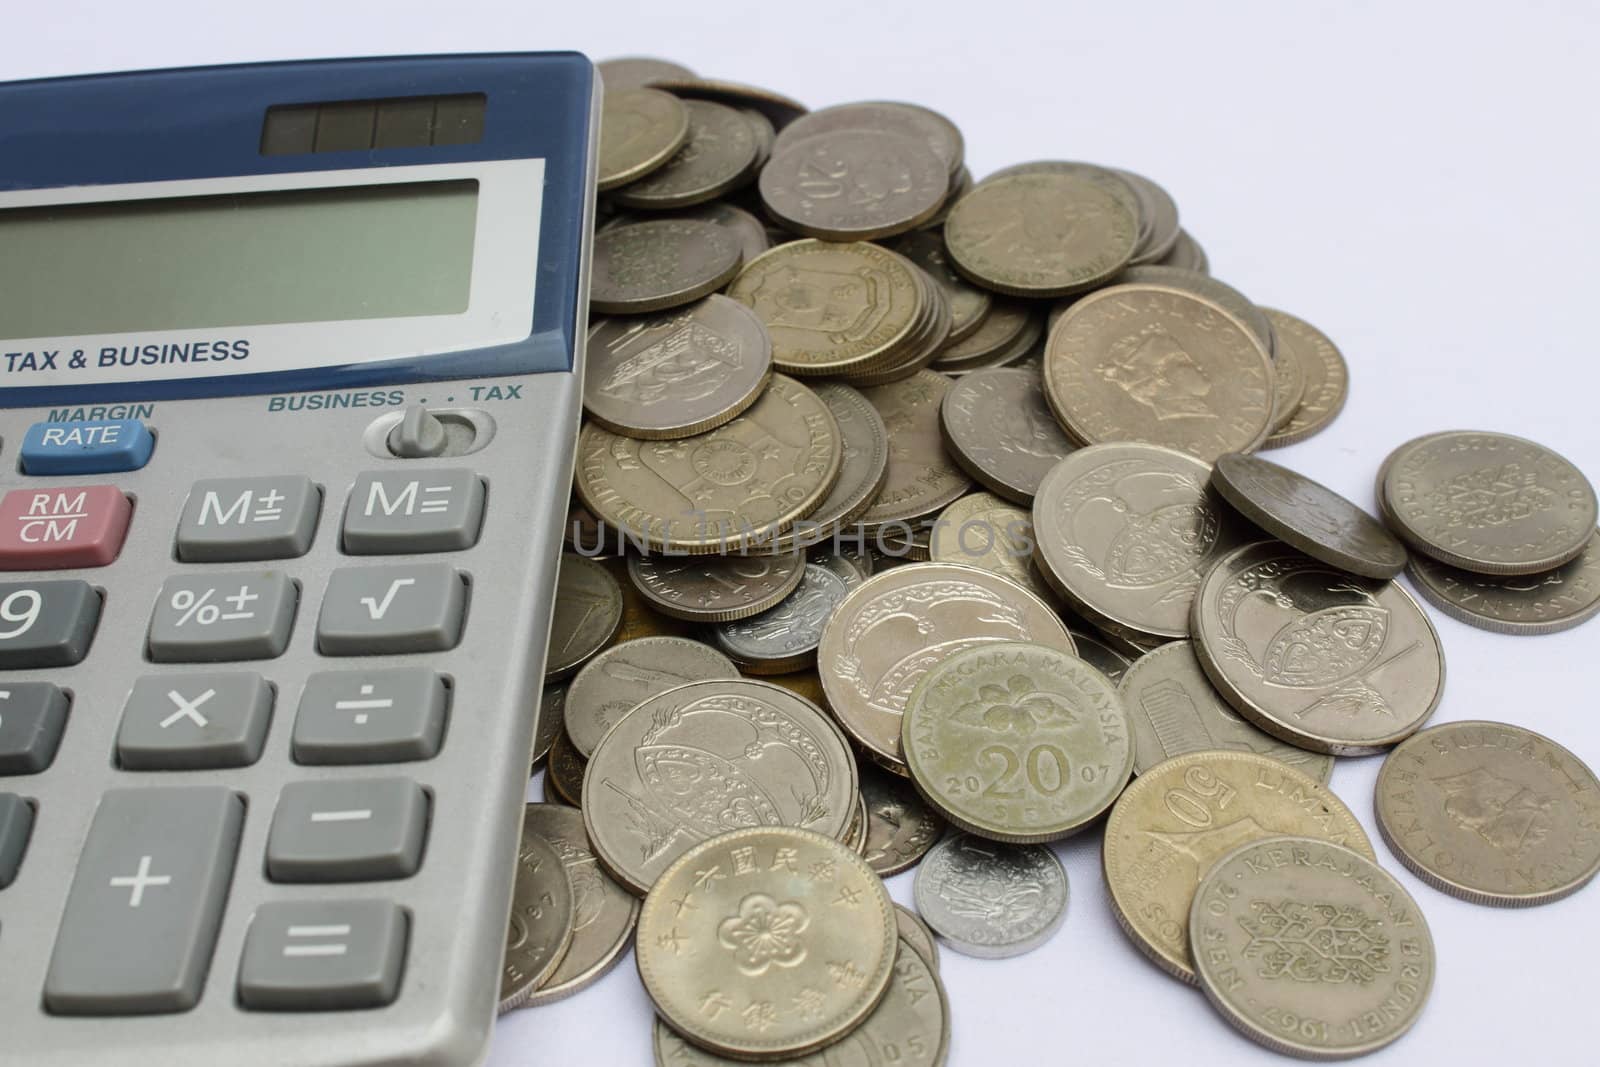 Calculating coins with aid of pocket calculator